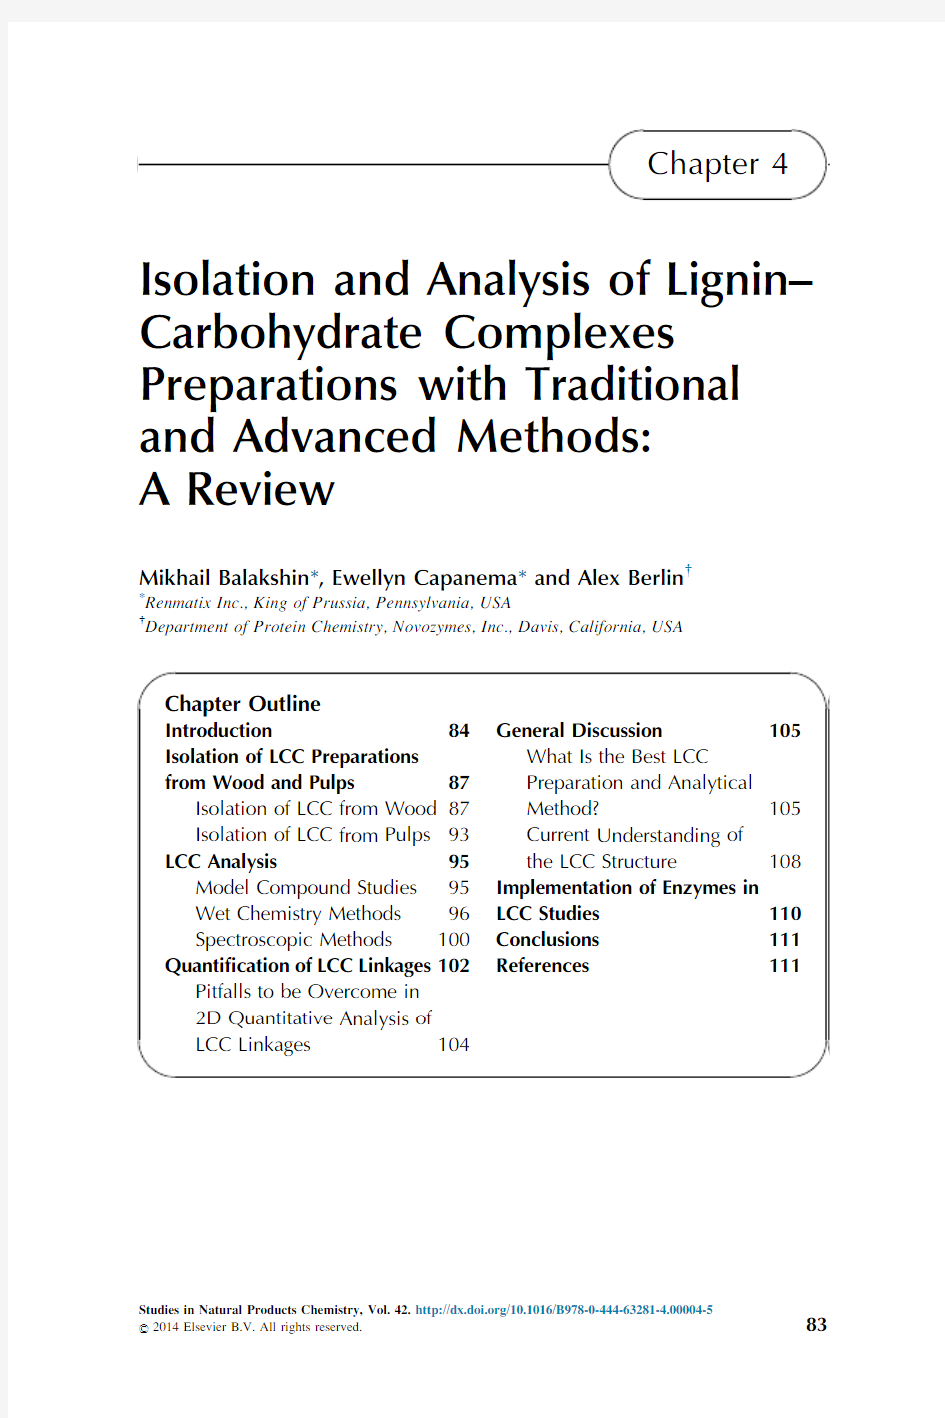 Isolation and Analysis of Lignin